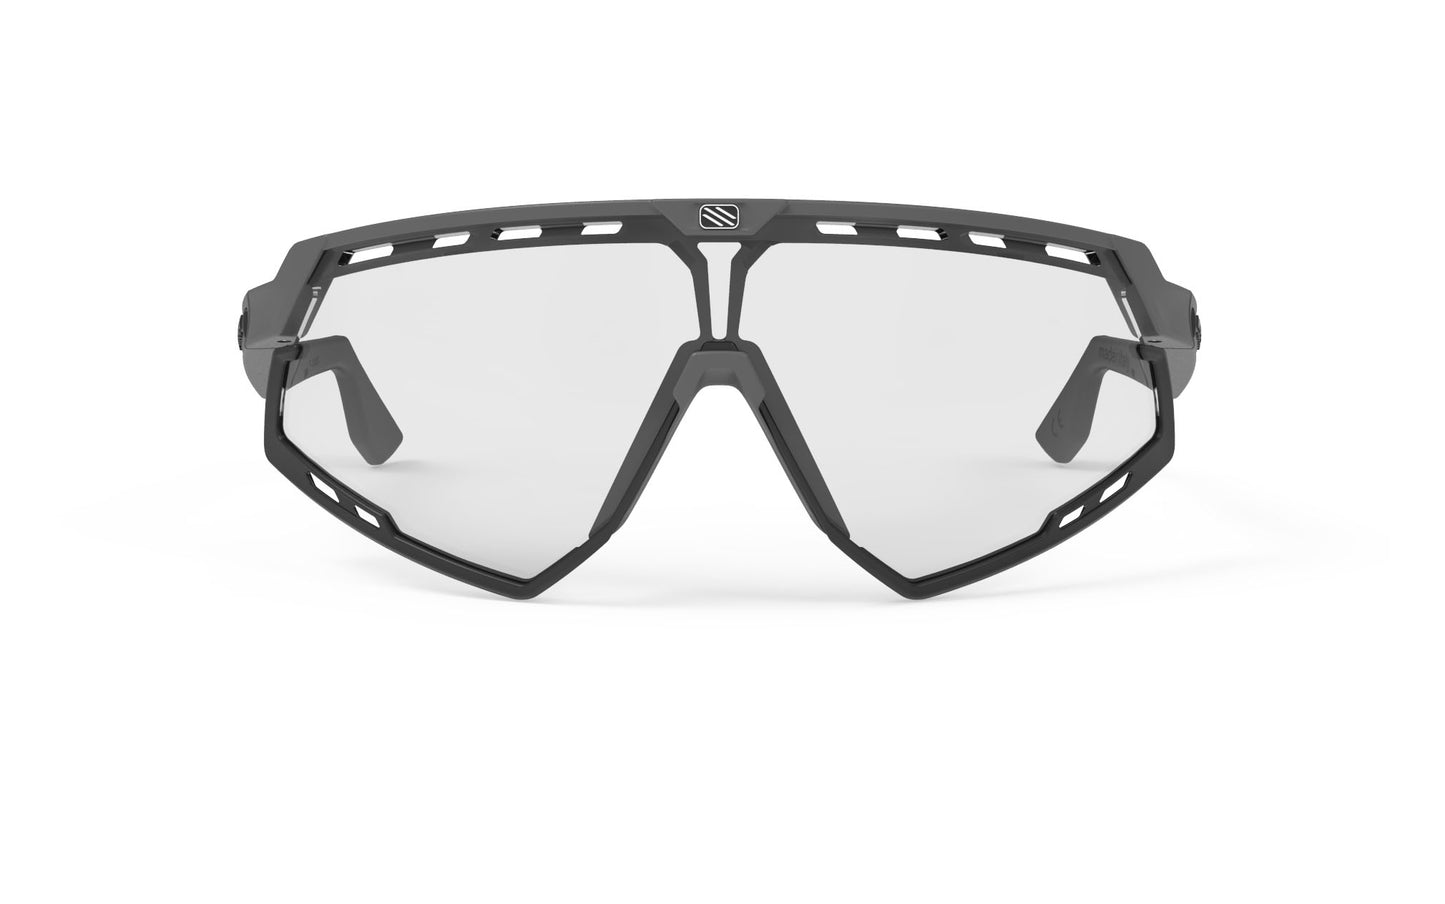 Load image into Gallery viewer, Rudy Project Defender Pyombo Matte - Impactx Photochromic 2 Black Sunglasses
